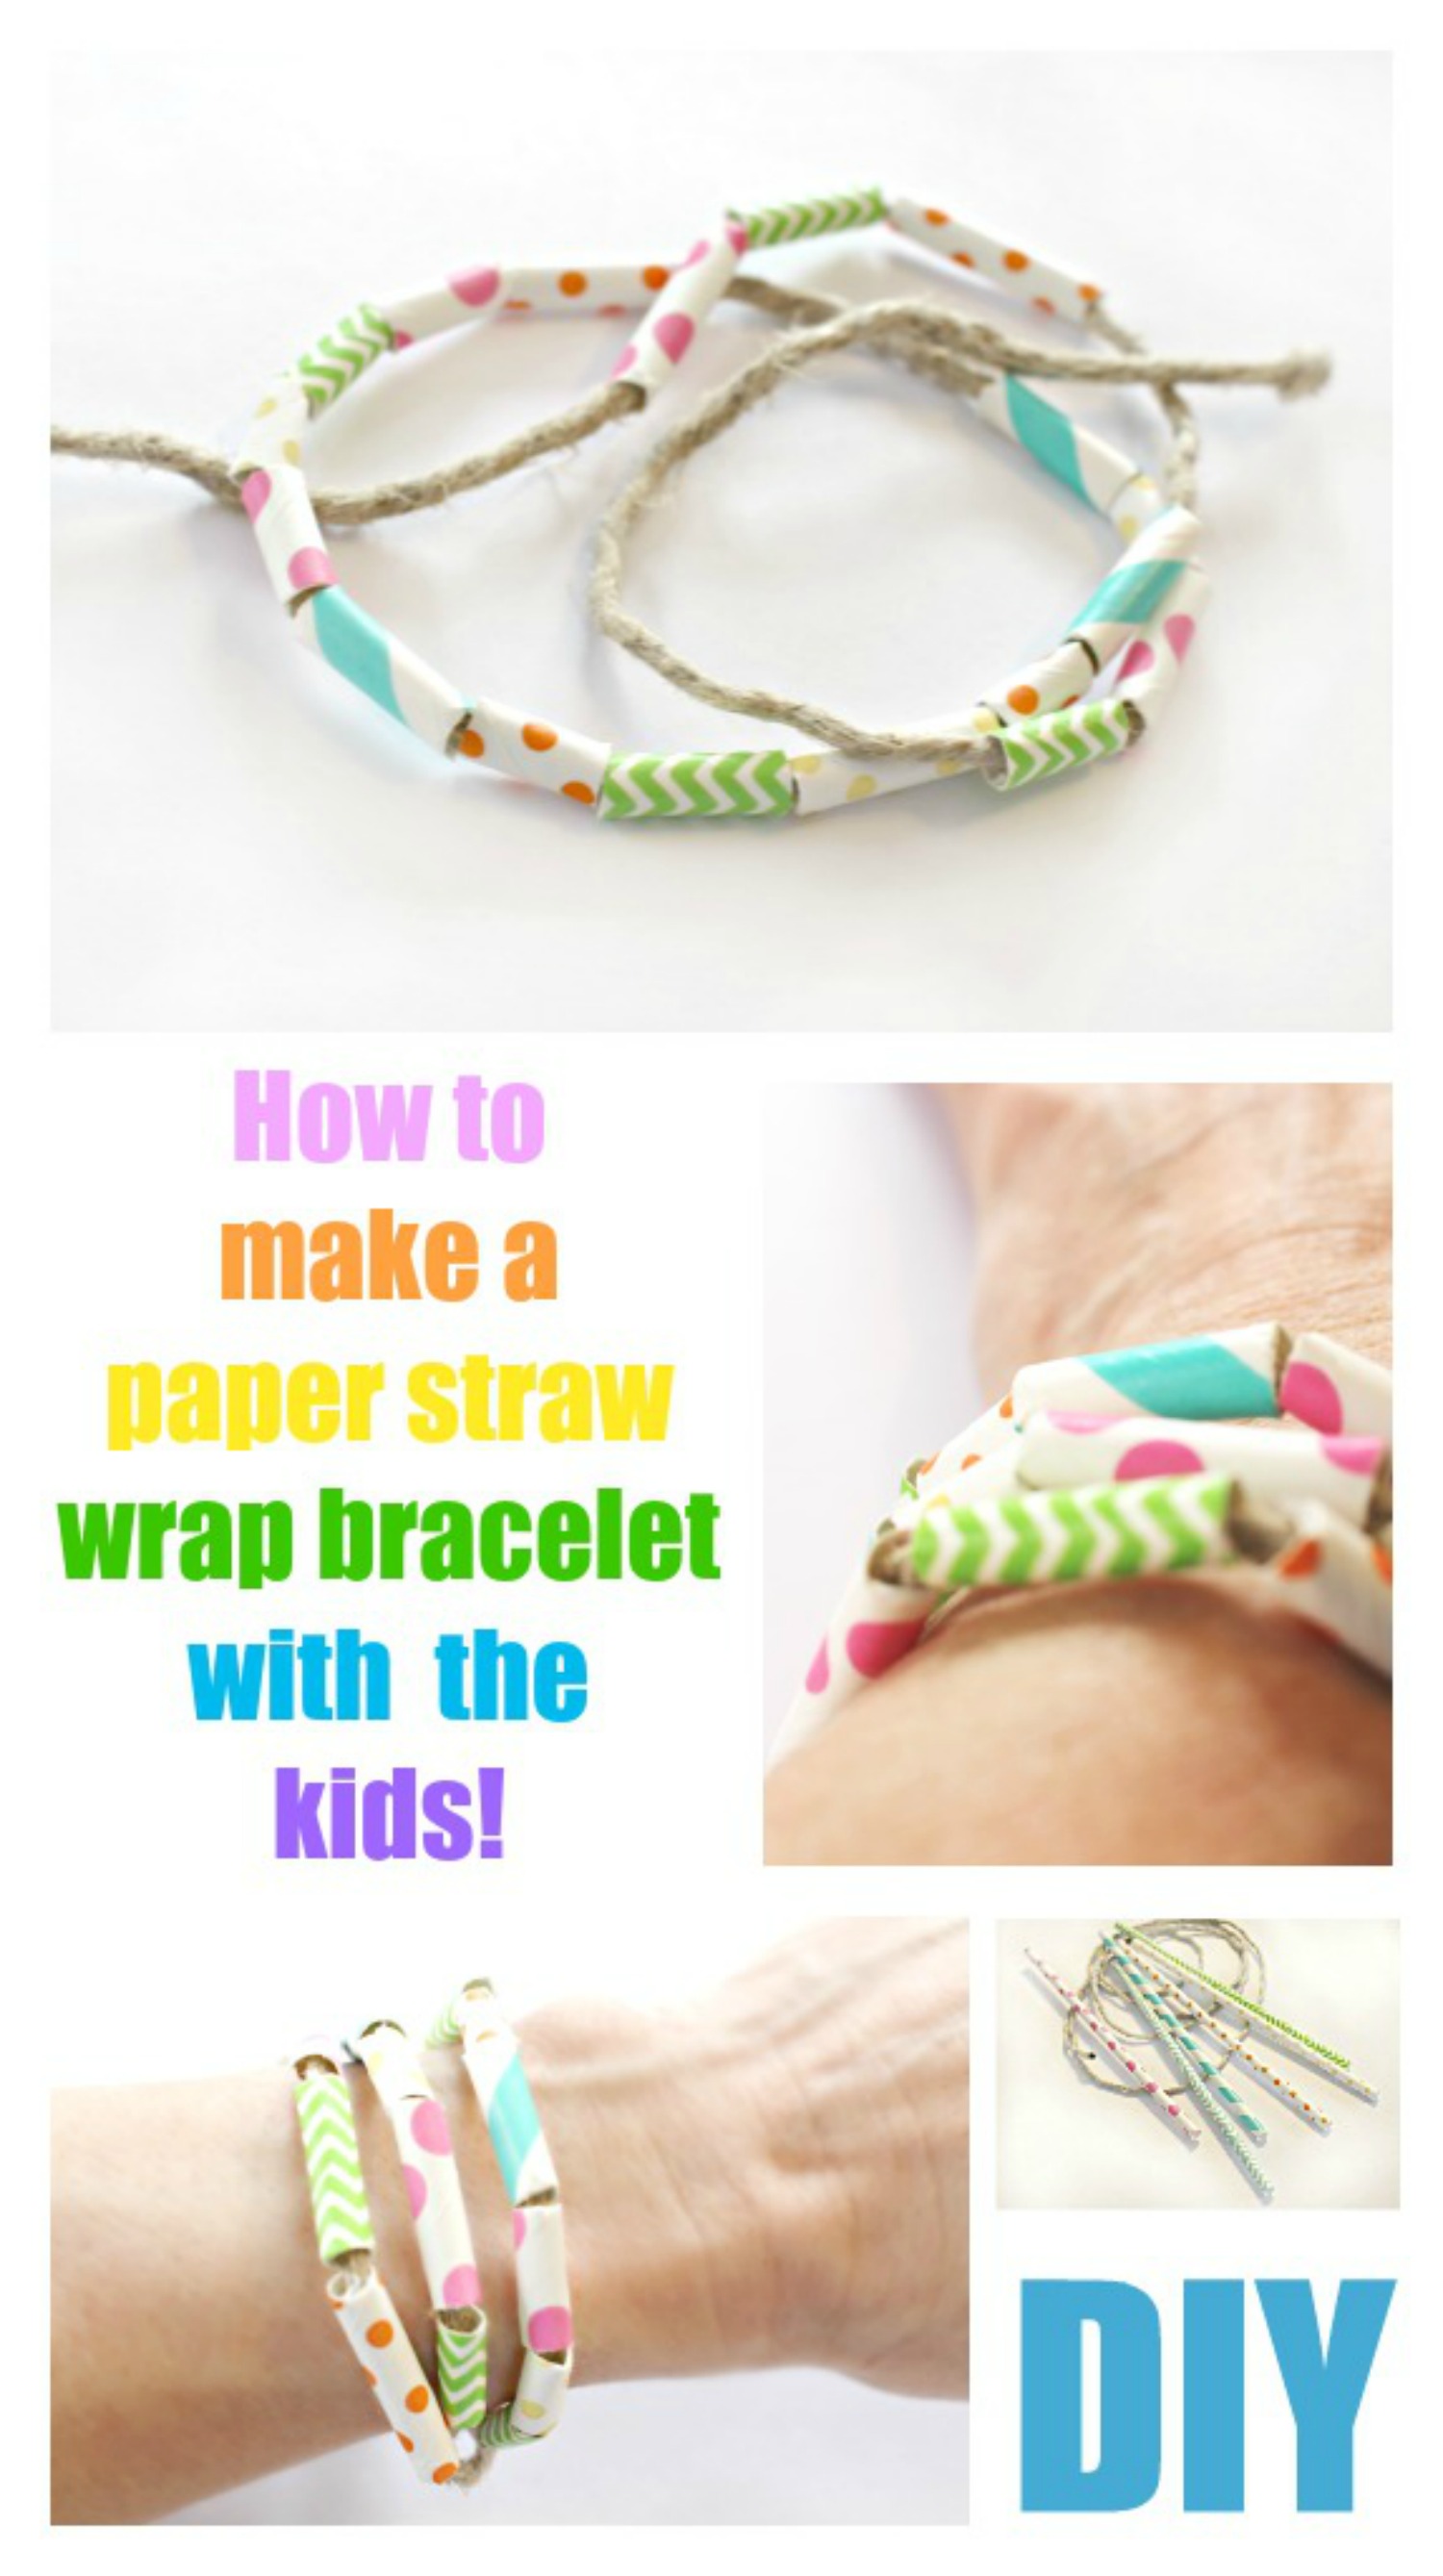 http://www.cuteasafox.com/wp-content/uploads/2015/03/DIY-_-How-to-make-a-paper-straw-wrap-bracelet-with-the-kids-.jpg